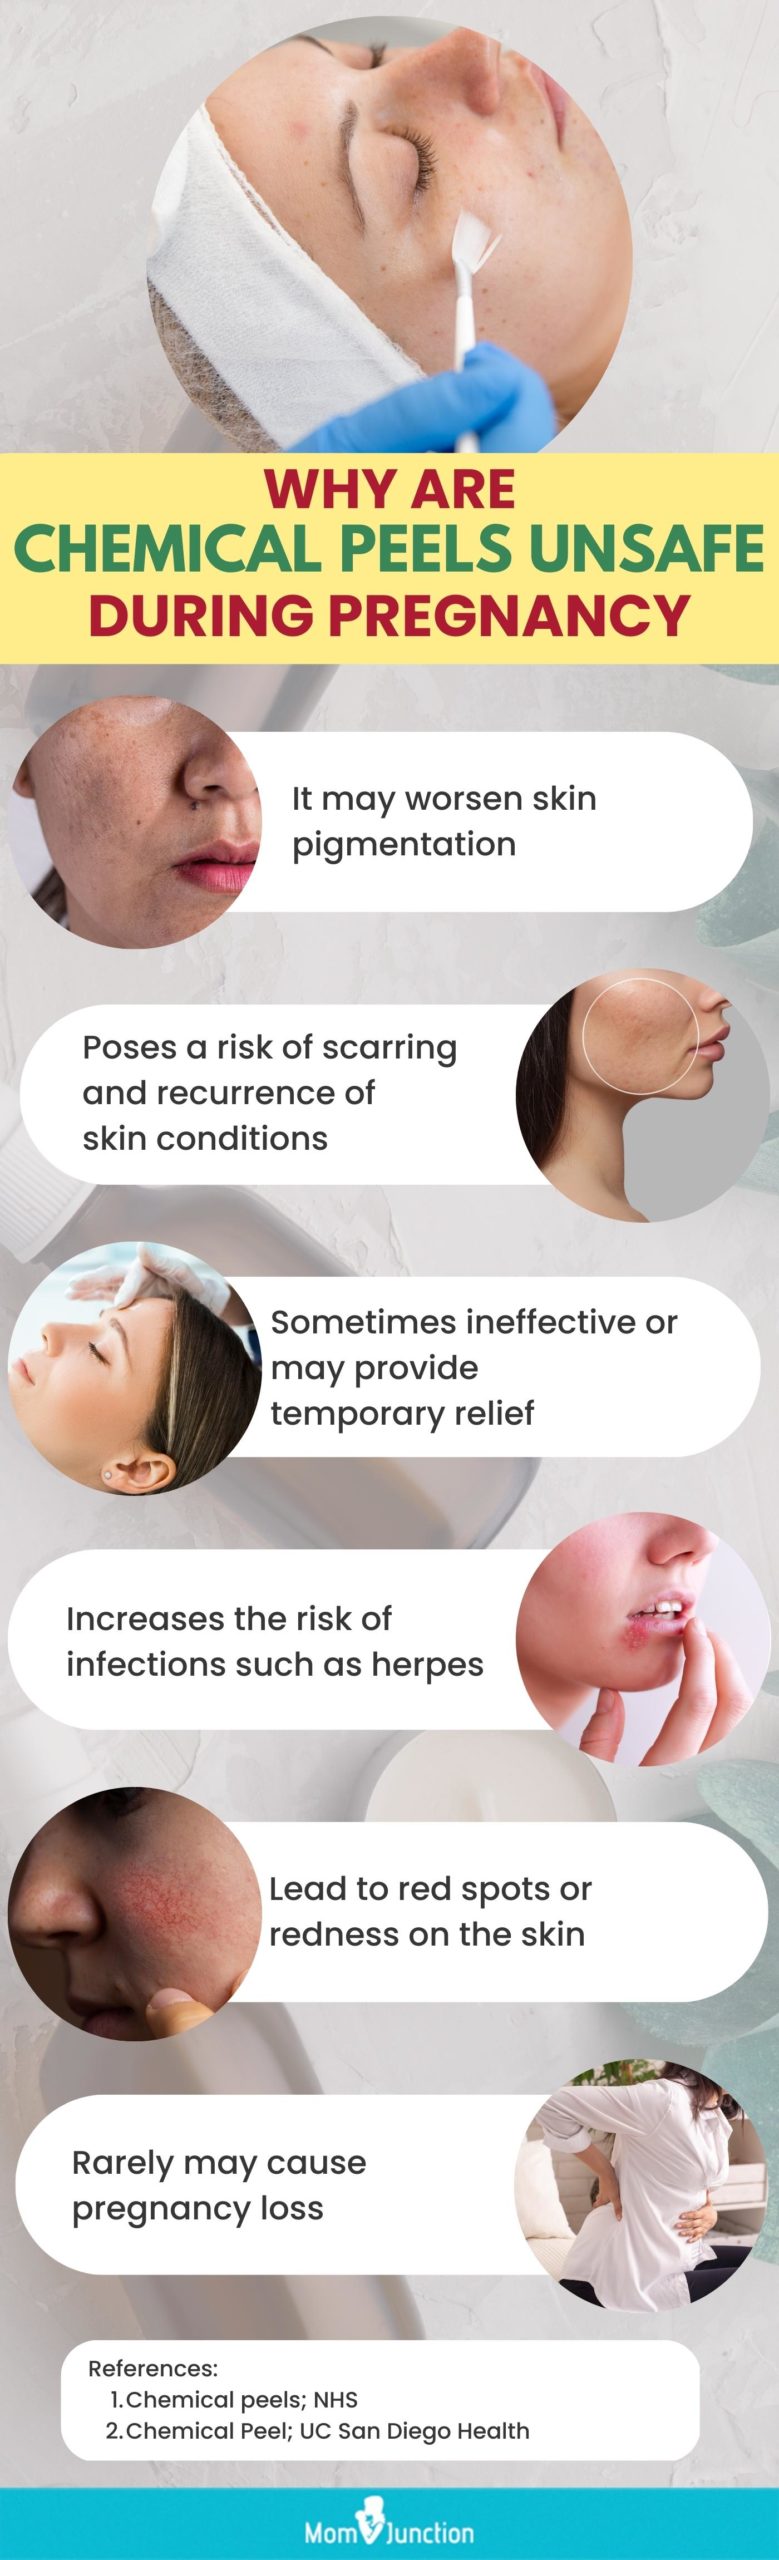 why are chemical peels unsafe during pregnancy (infographic)